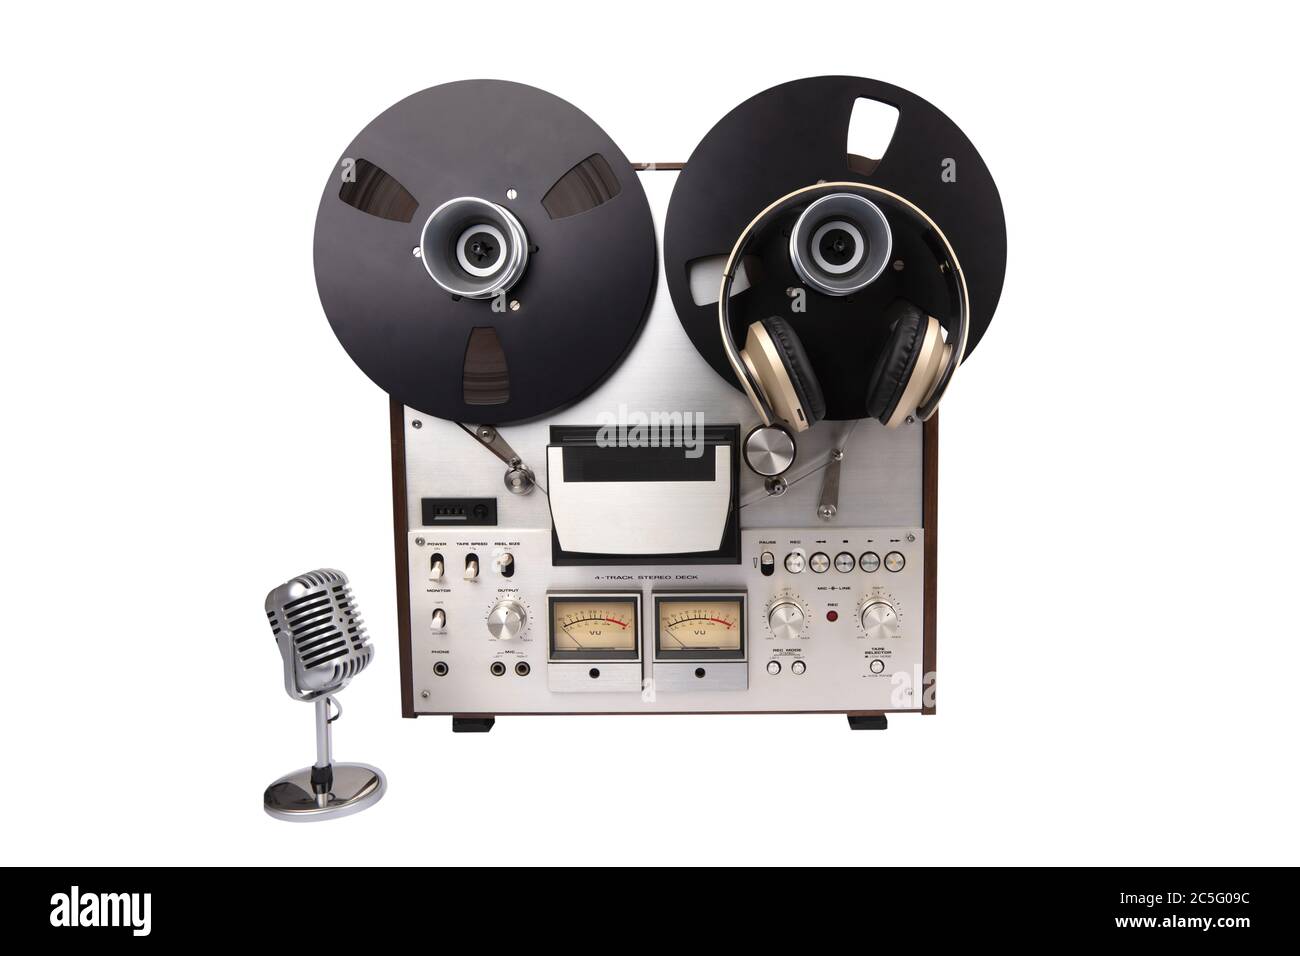 REEL to REEL Audio Tape Recorder with Headphones and Microphone